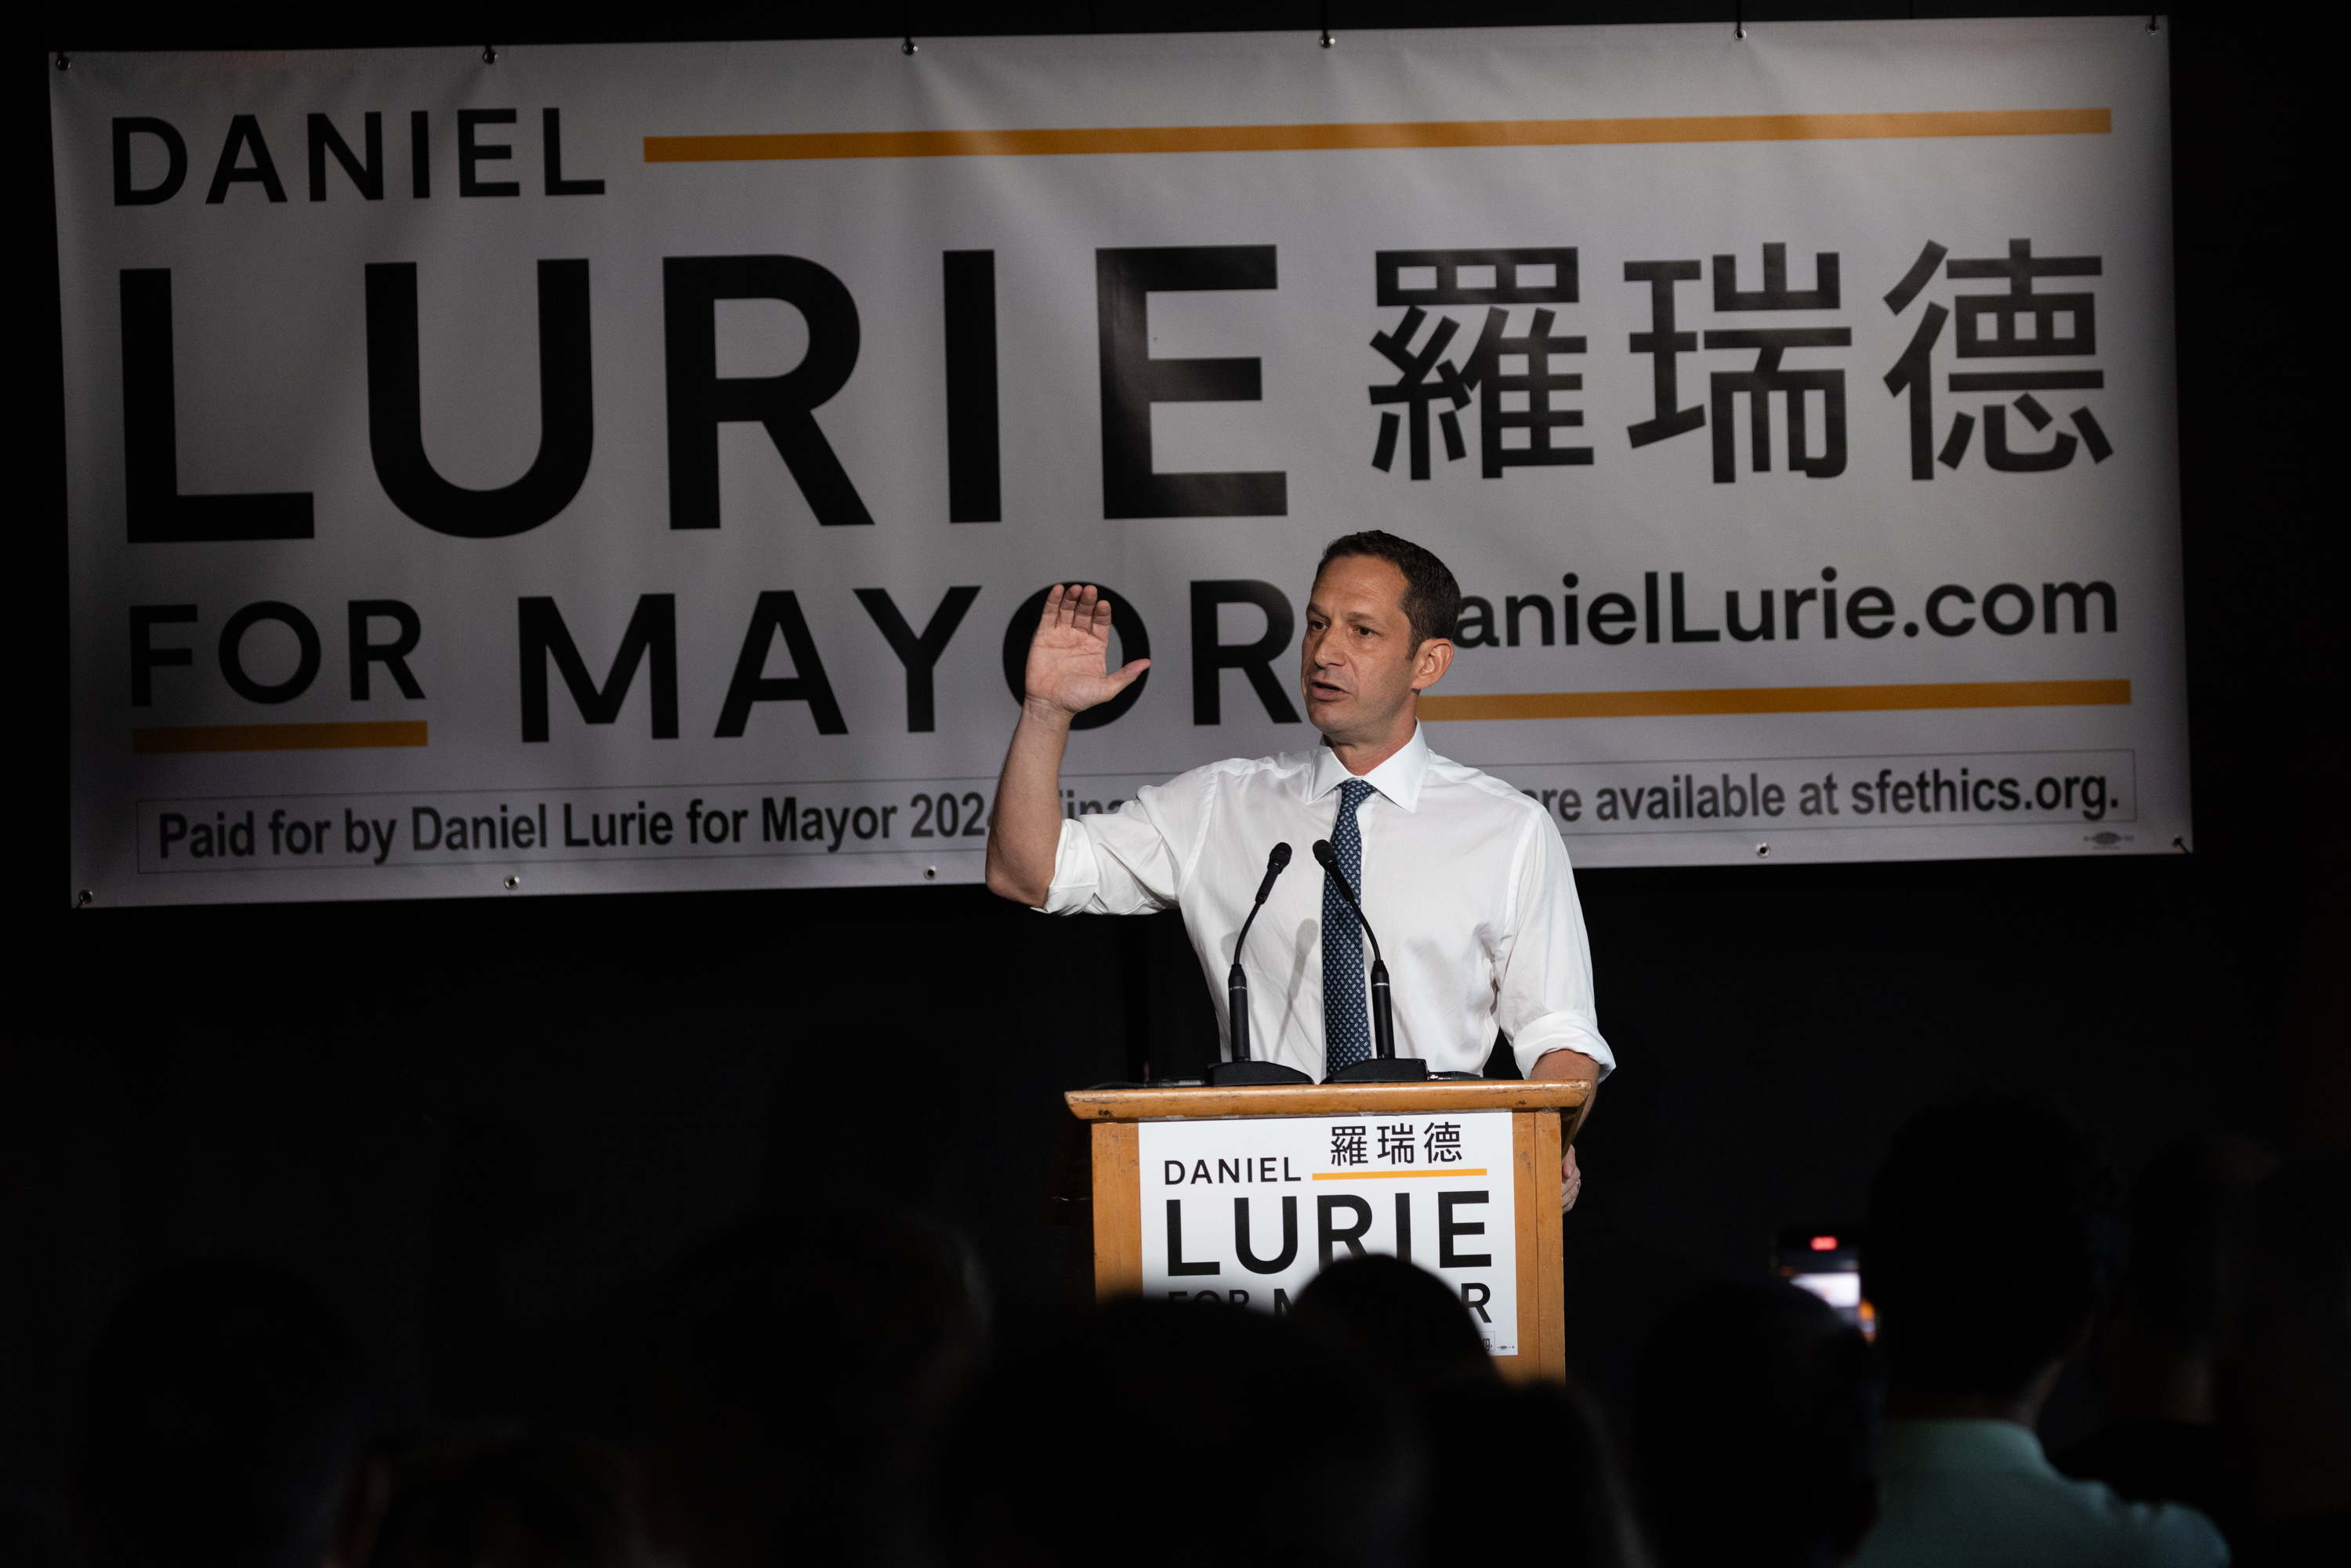 Daniel Lurie speaks at a press conference at the Potrero Hill Neighborhood House after filing paperwork officially announcing his candidacy for mayor of San Francisco on Sept. 26, 2023. Lurie is challenging Mayor London Breed for the position.